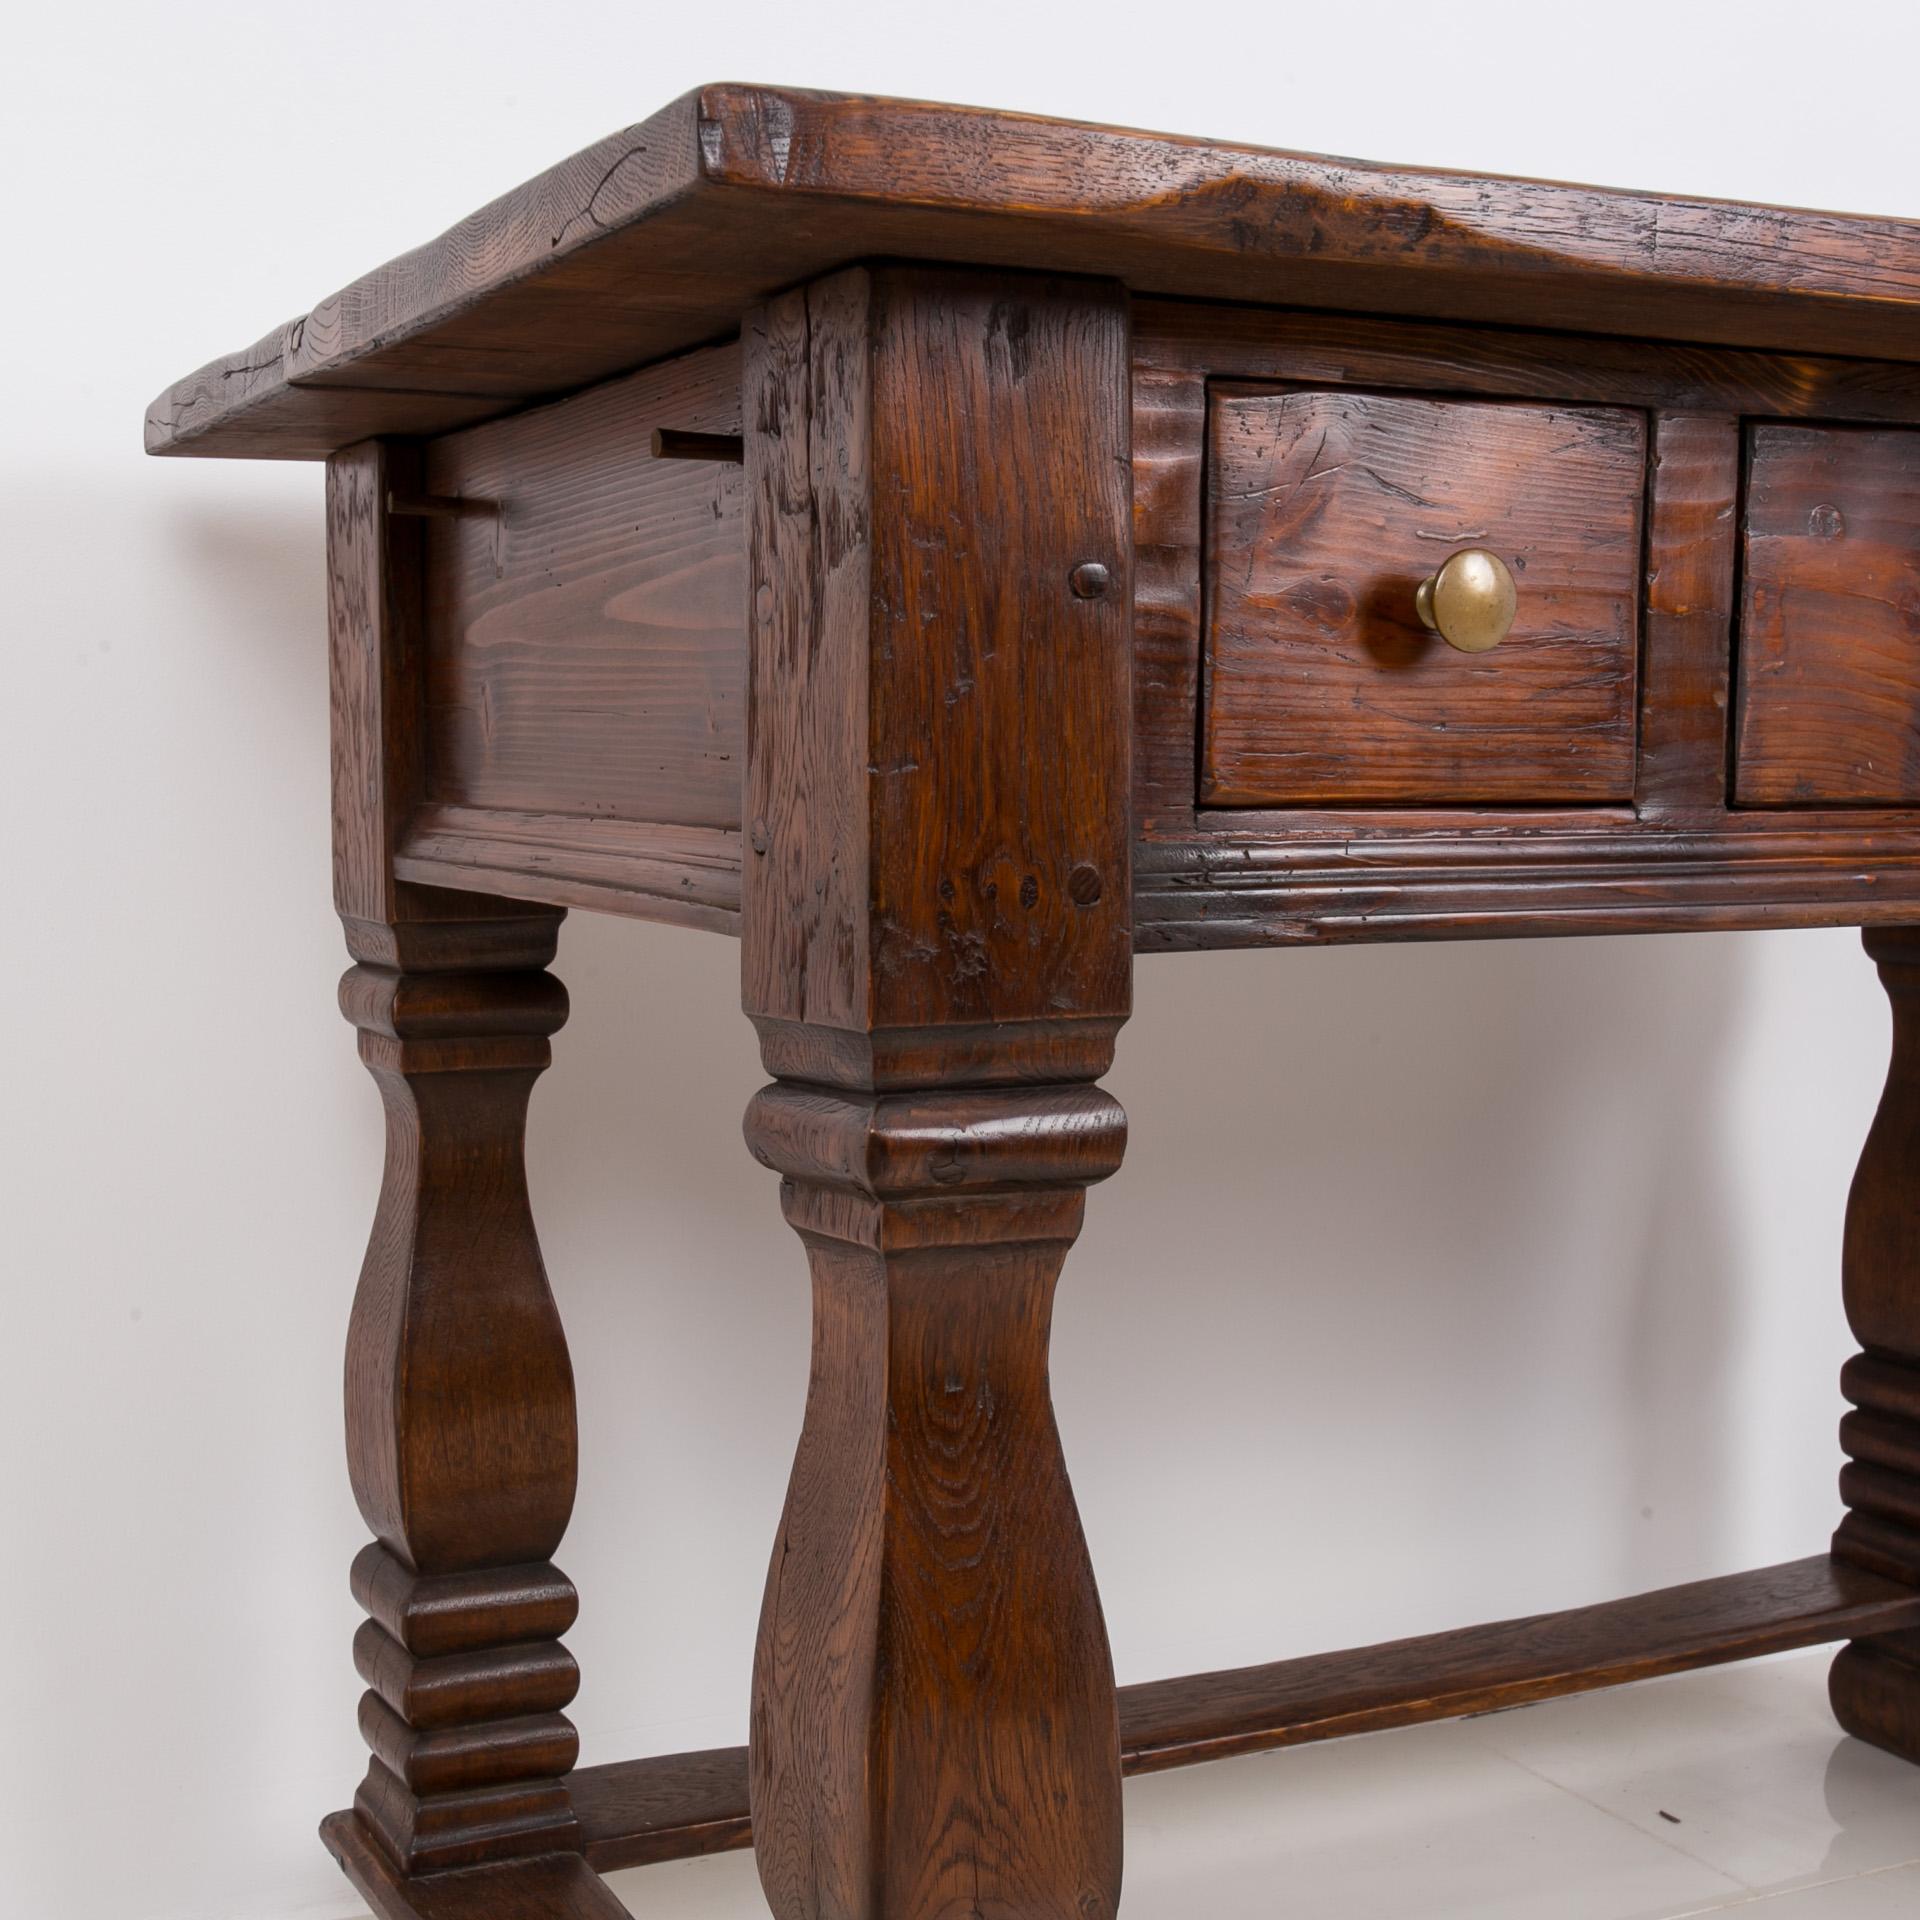 Solid Oak Table, 18th / 19th Century, Rustic Style, Prep or Dining Table 10